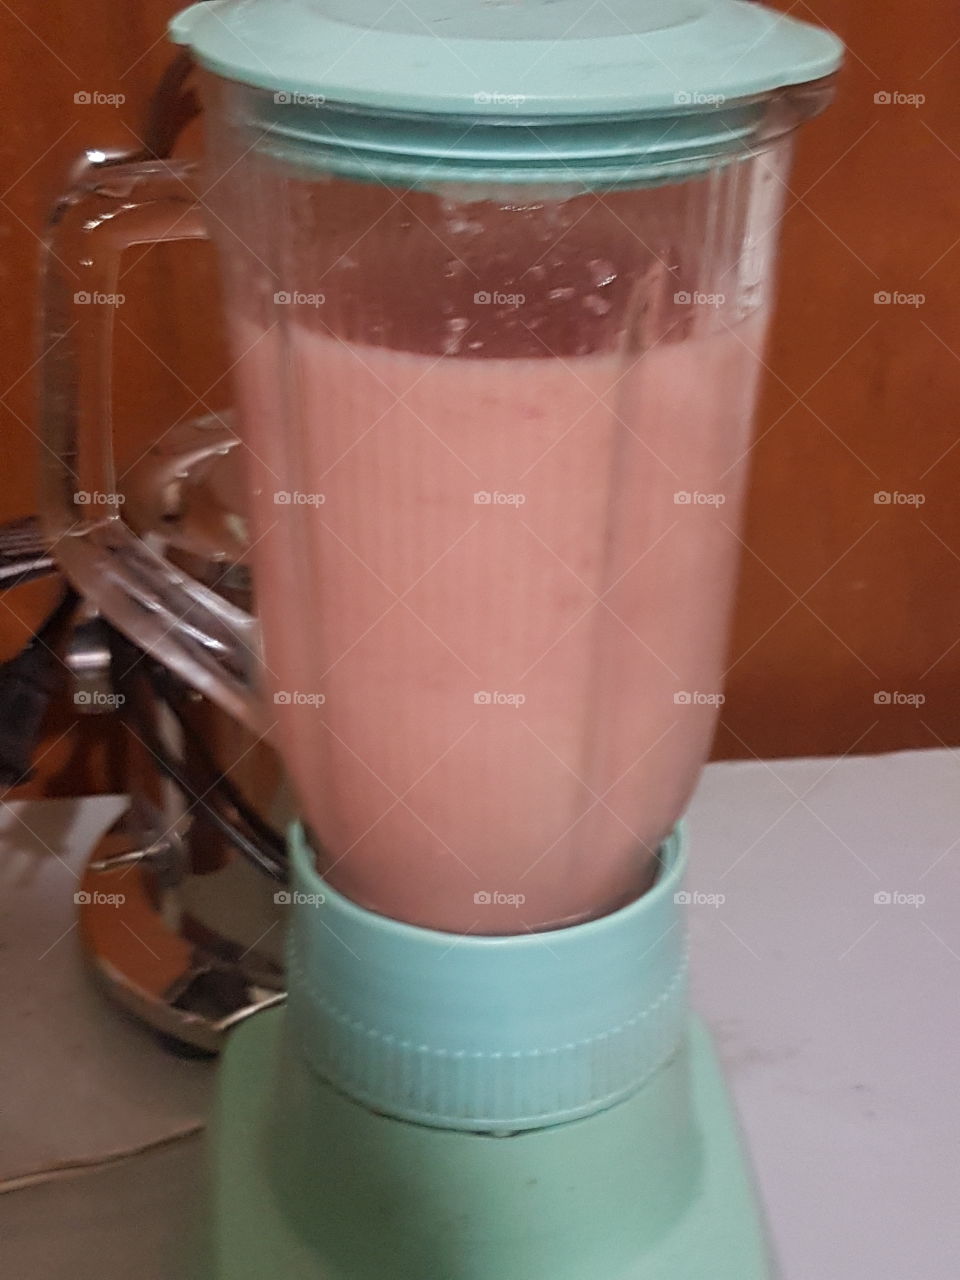 Apple, Pears and Strawberry Shake